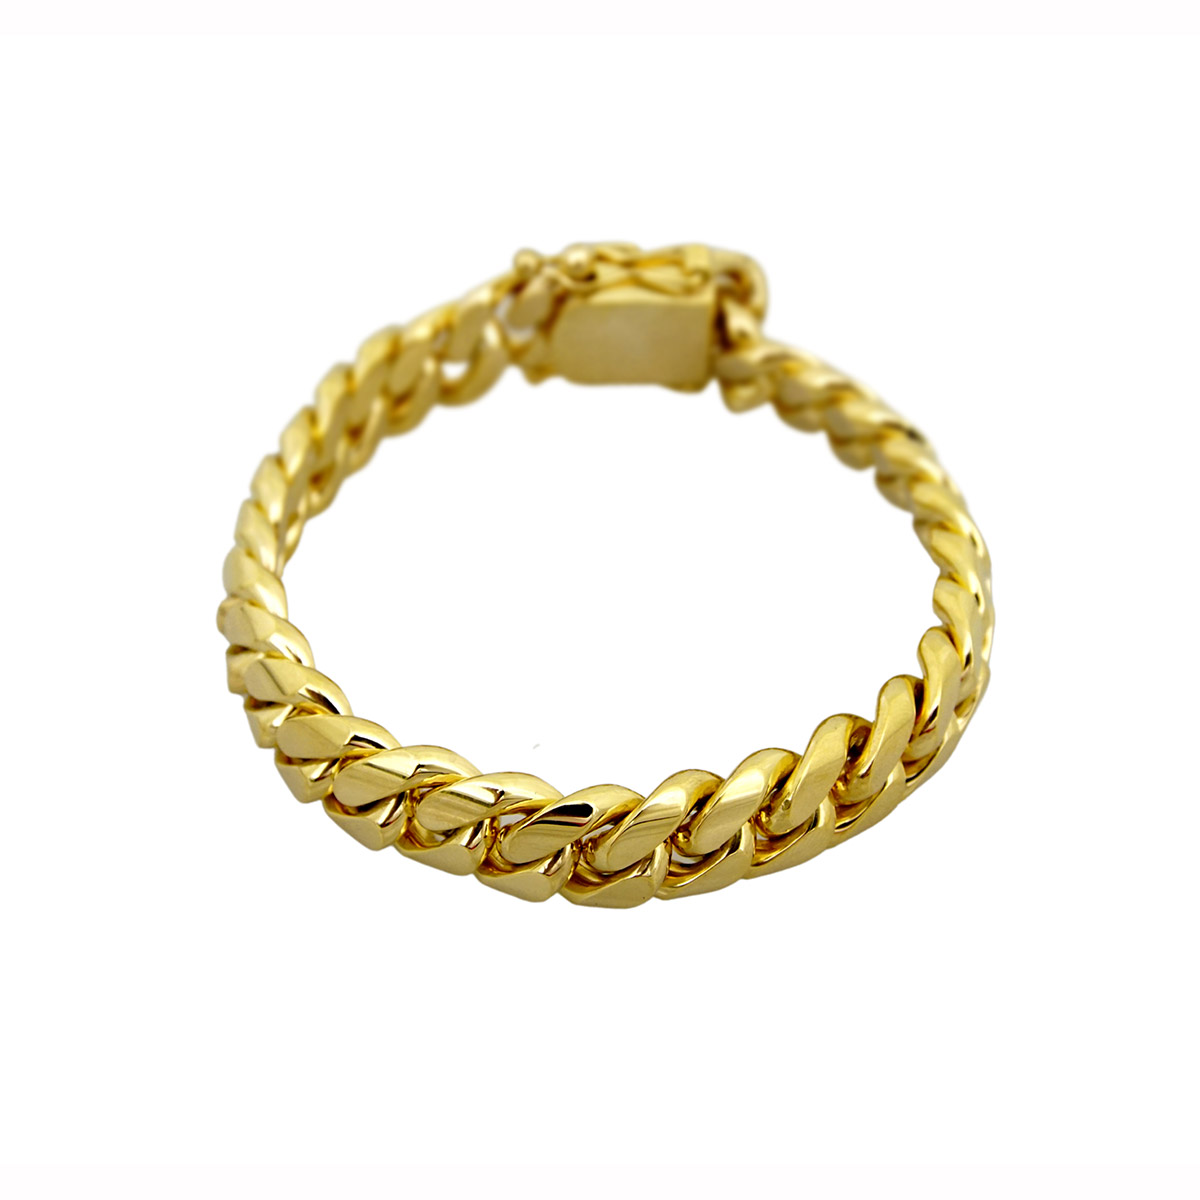 14mm Solid Cuban Link Bracelet in 10K Yellow Gold - Pochy Jewelry Factory